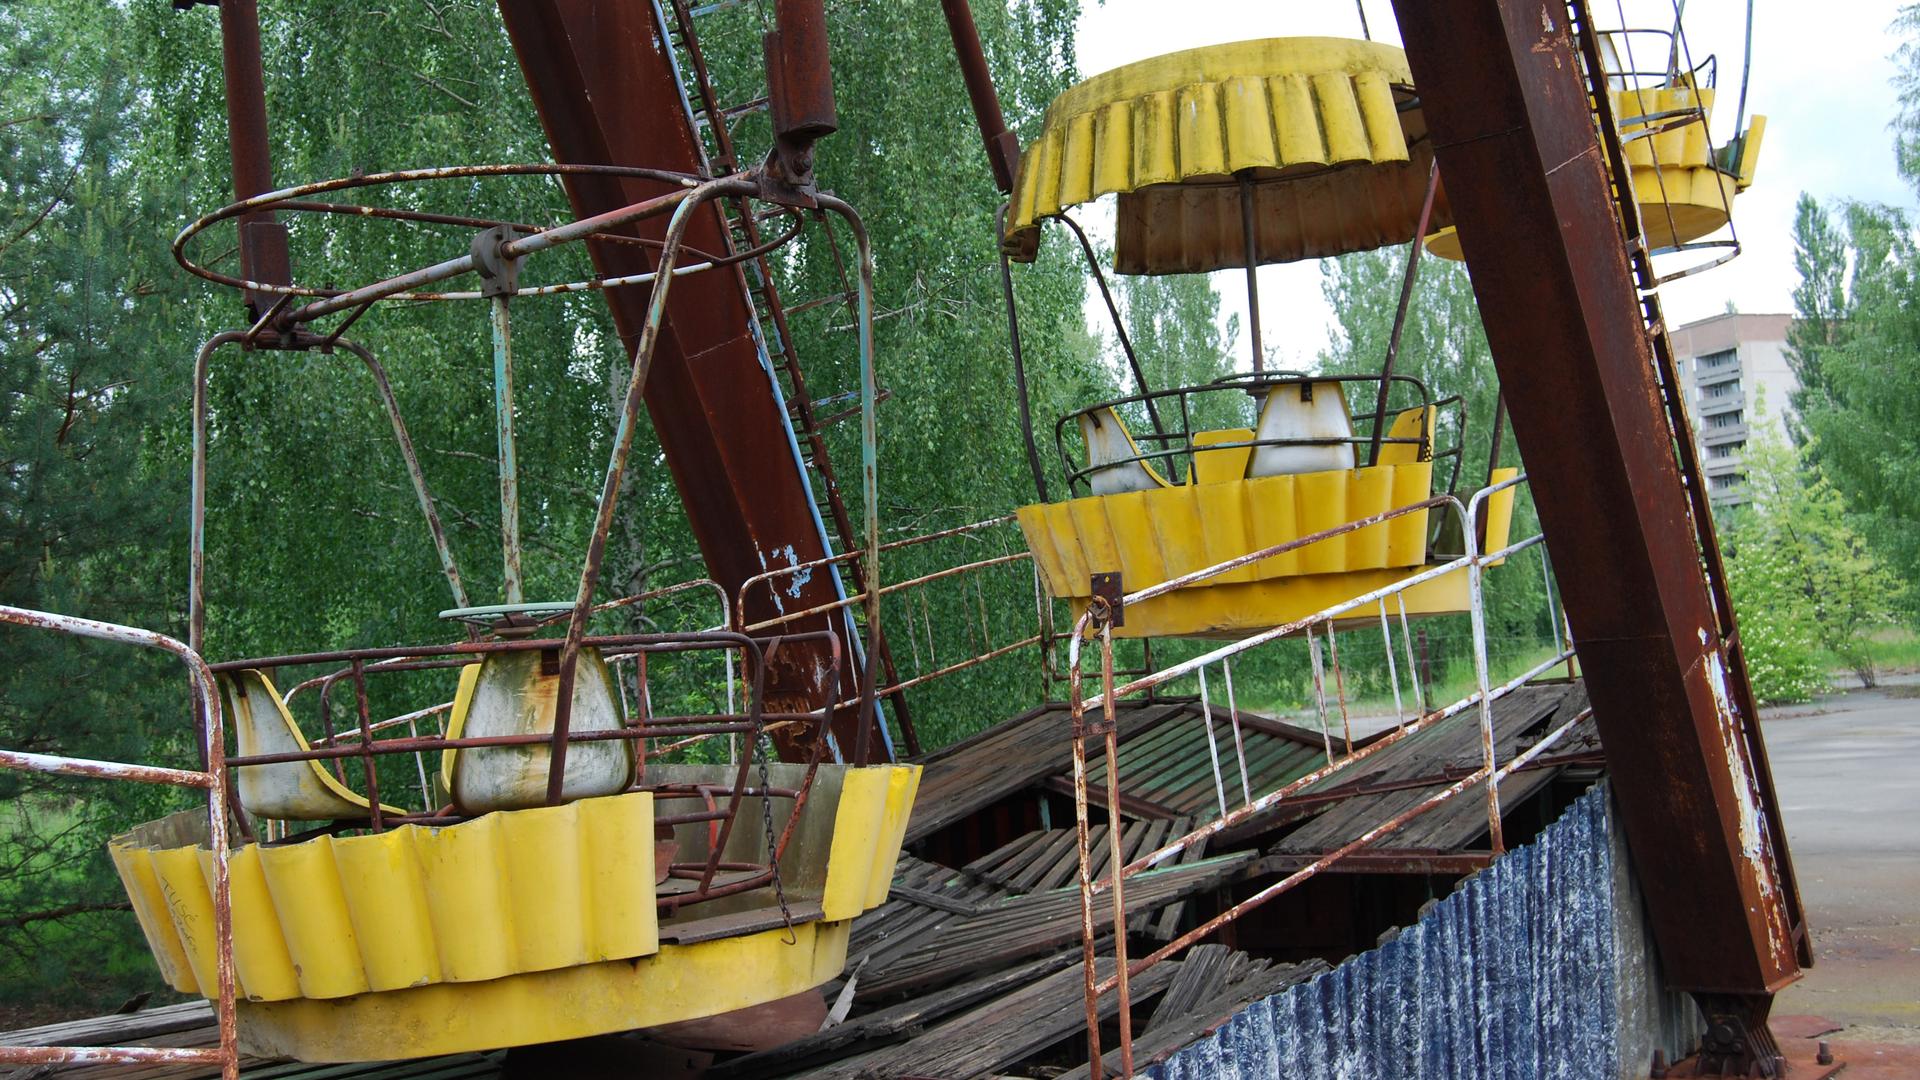 An old Ferris wheel in Pripyat. An amusement park was set to be opened May 1st, 1986, just days after the Chernobyl disaster.